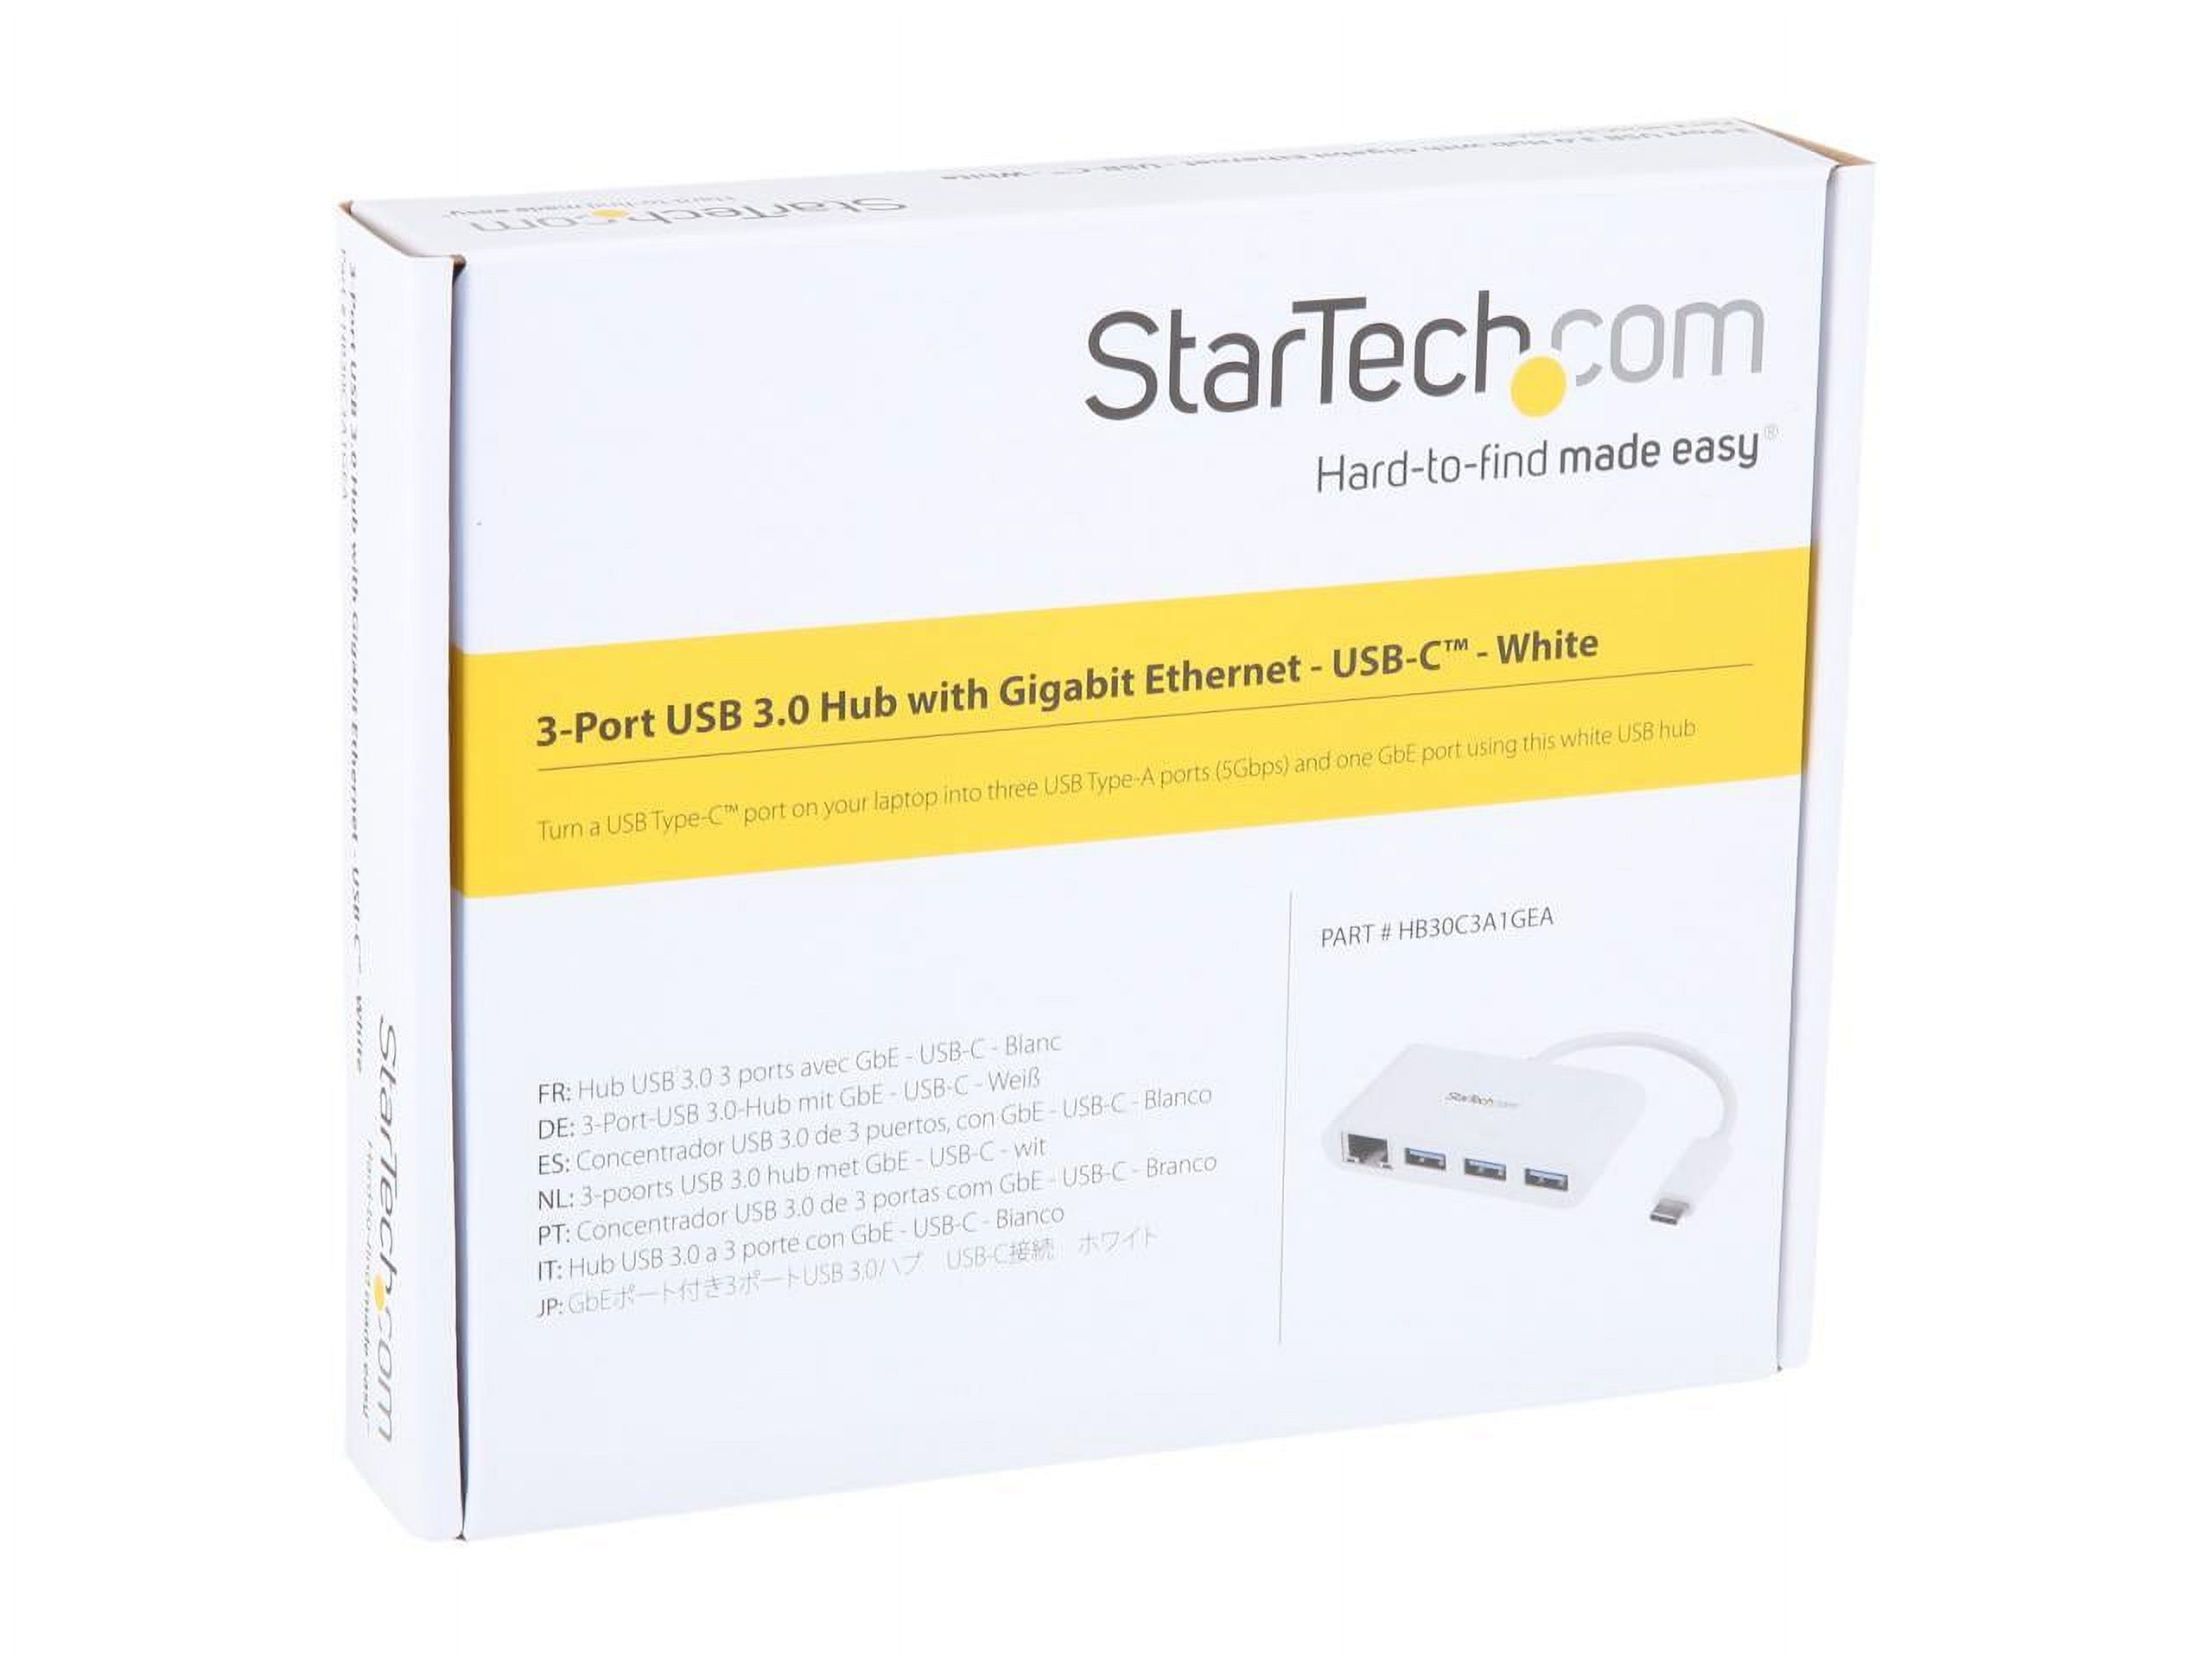 StarTech HB30C3A1GEA USB-C to Ethernet Adapter with 3 Port USB C Hub - Gigabit - White - Thunderbolt 3 Compatible - MacBook Pro 2016 - image 4 of 4